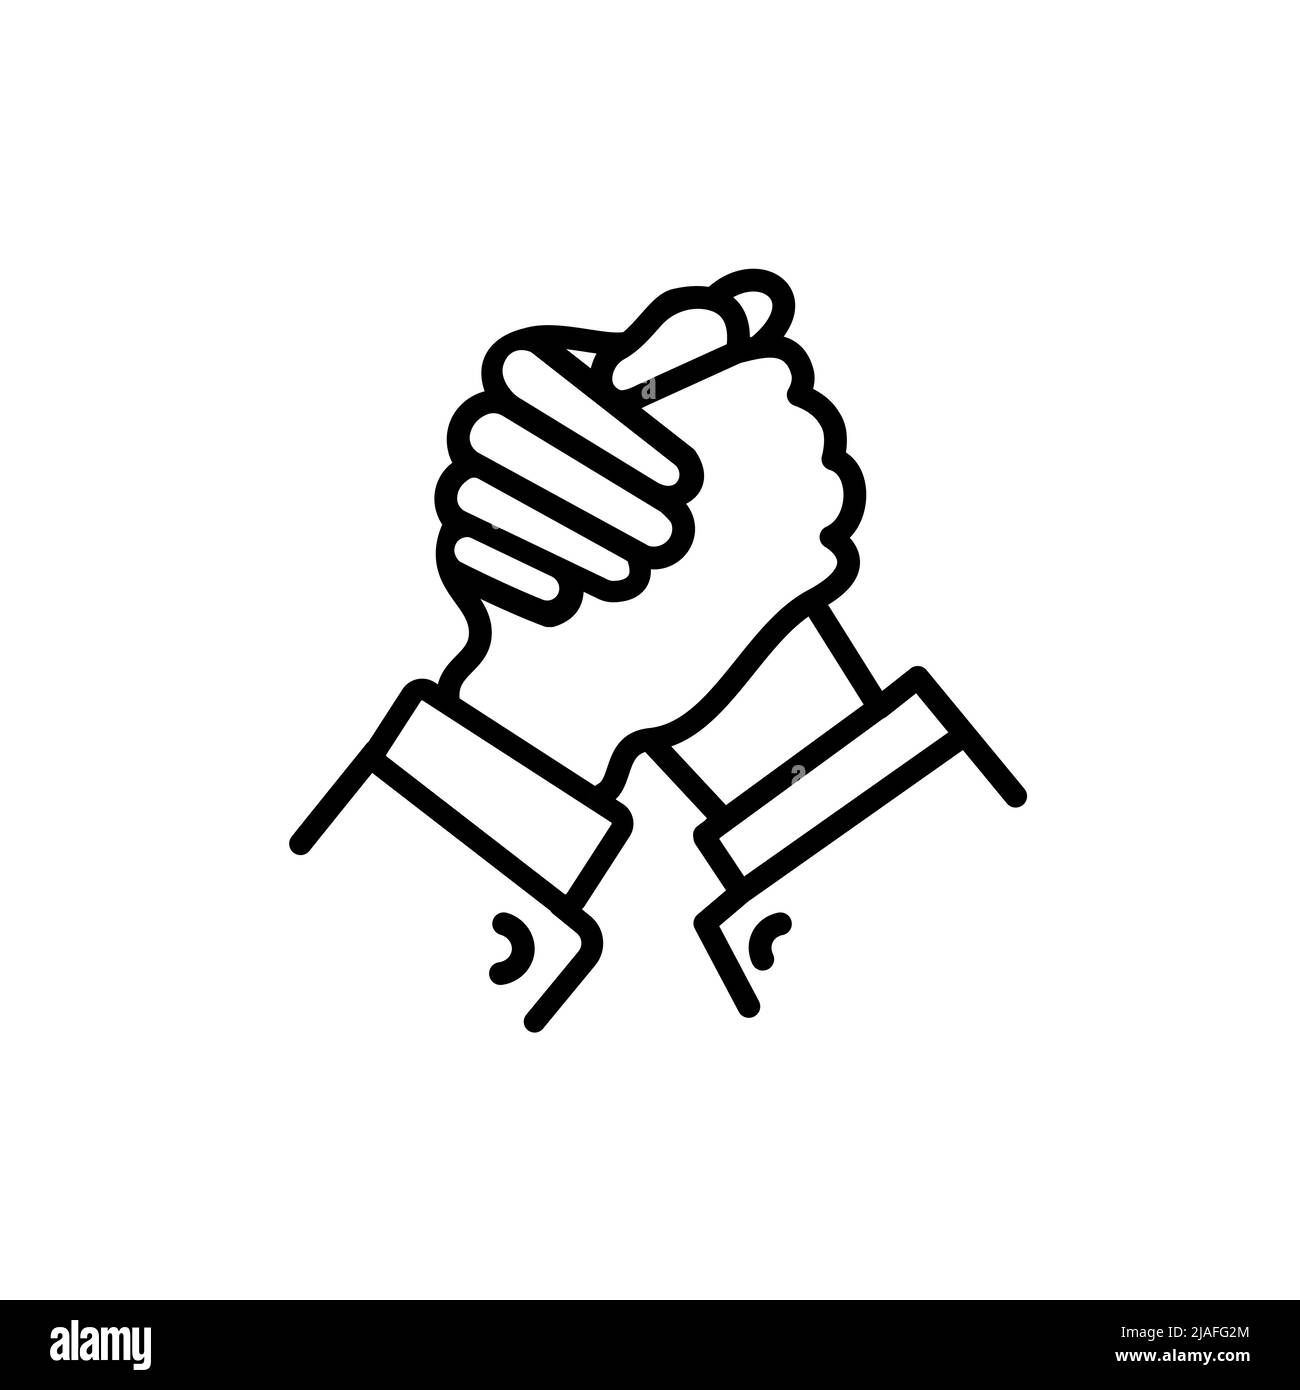 Silhouette of Soul Brother Hand Shake Sign on White Background with White Lines Defining Thumb and Fingers. Hand Gesture Flat Icon Vector Illustration Stock Vector